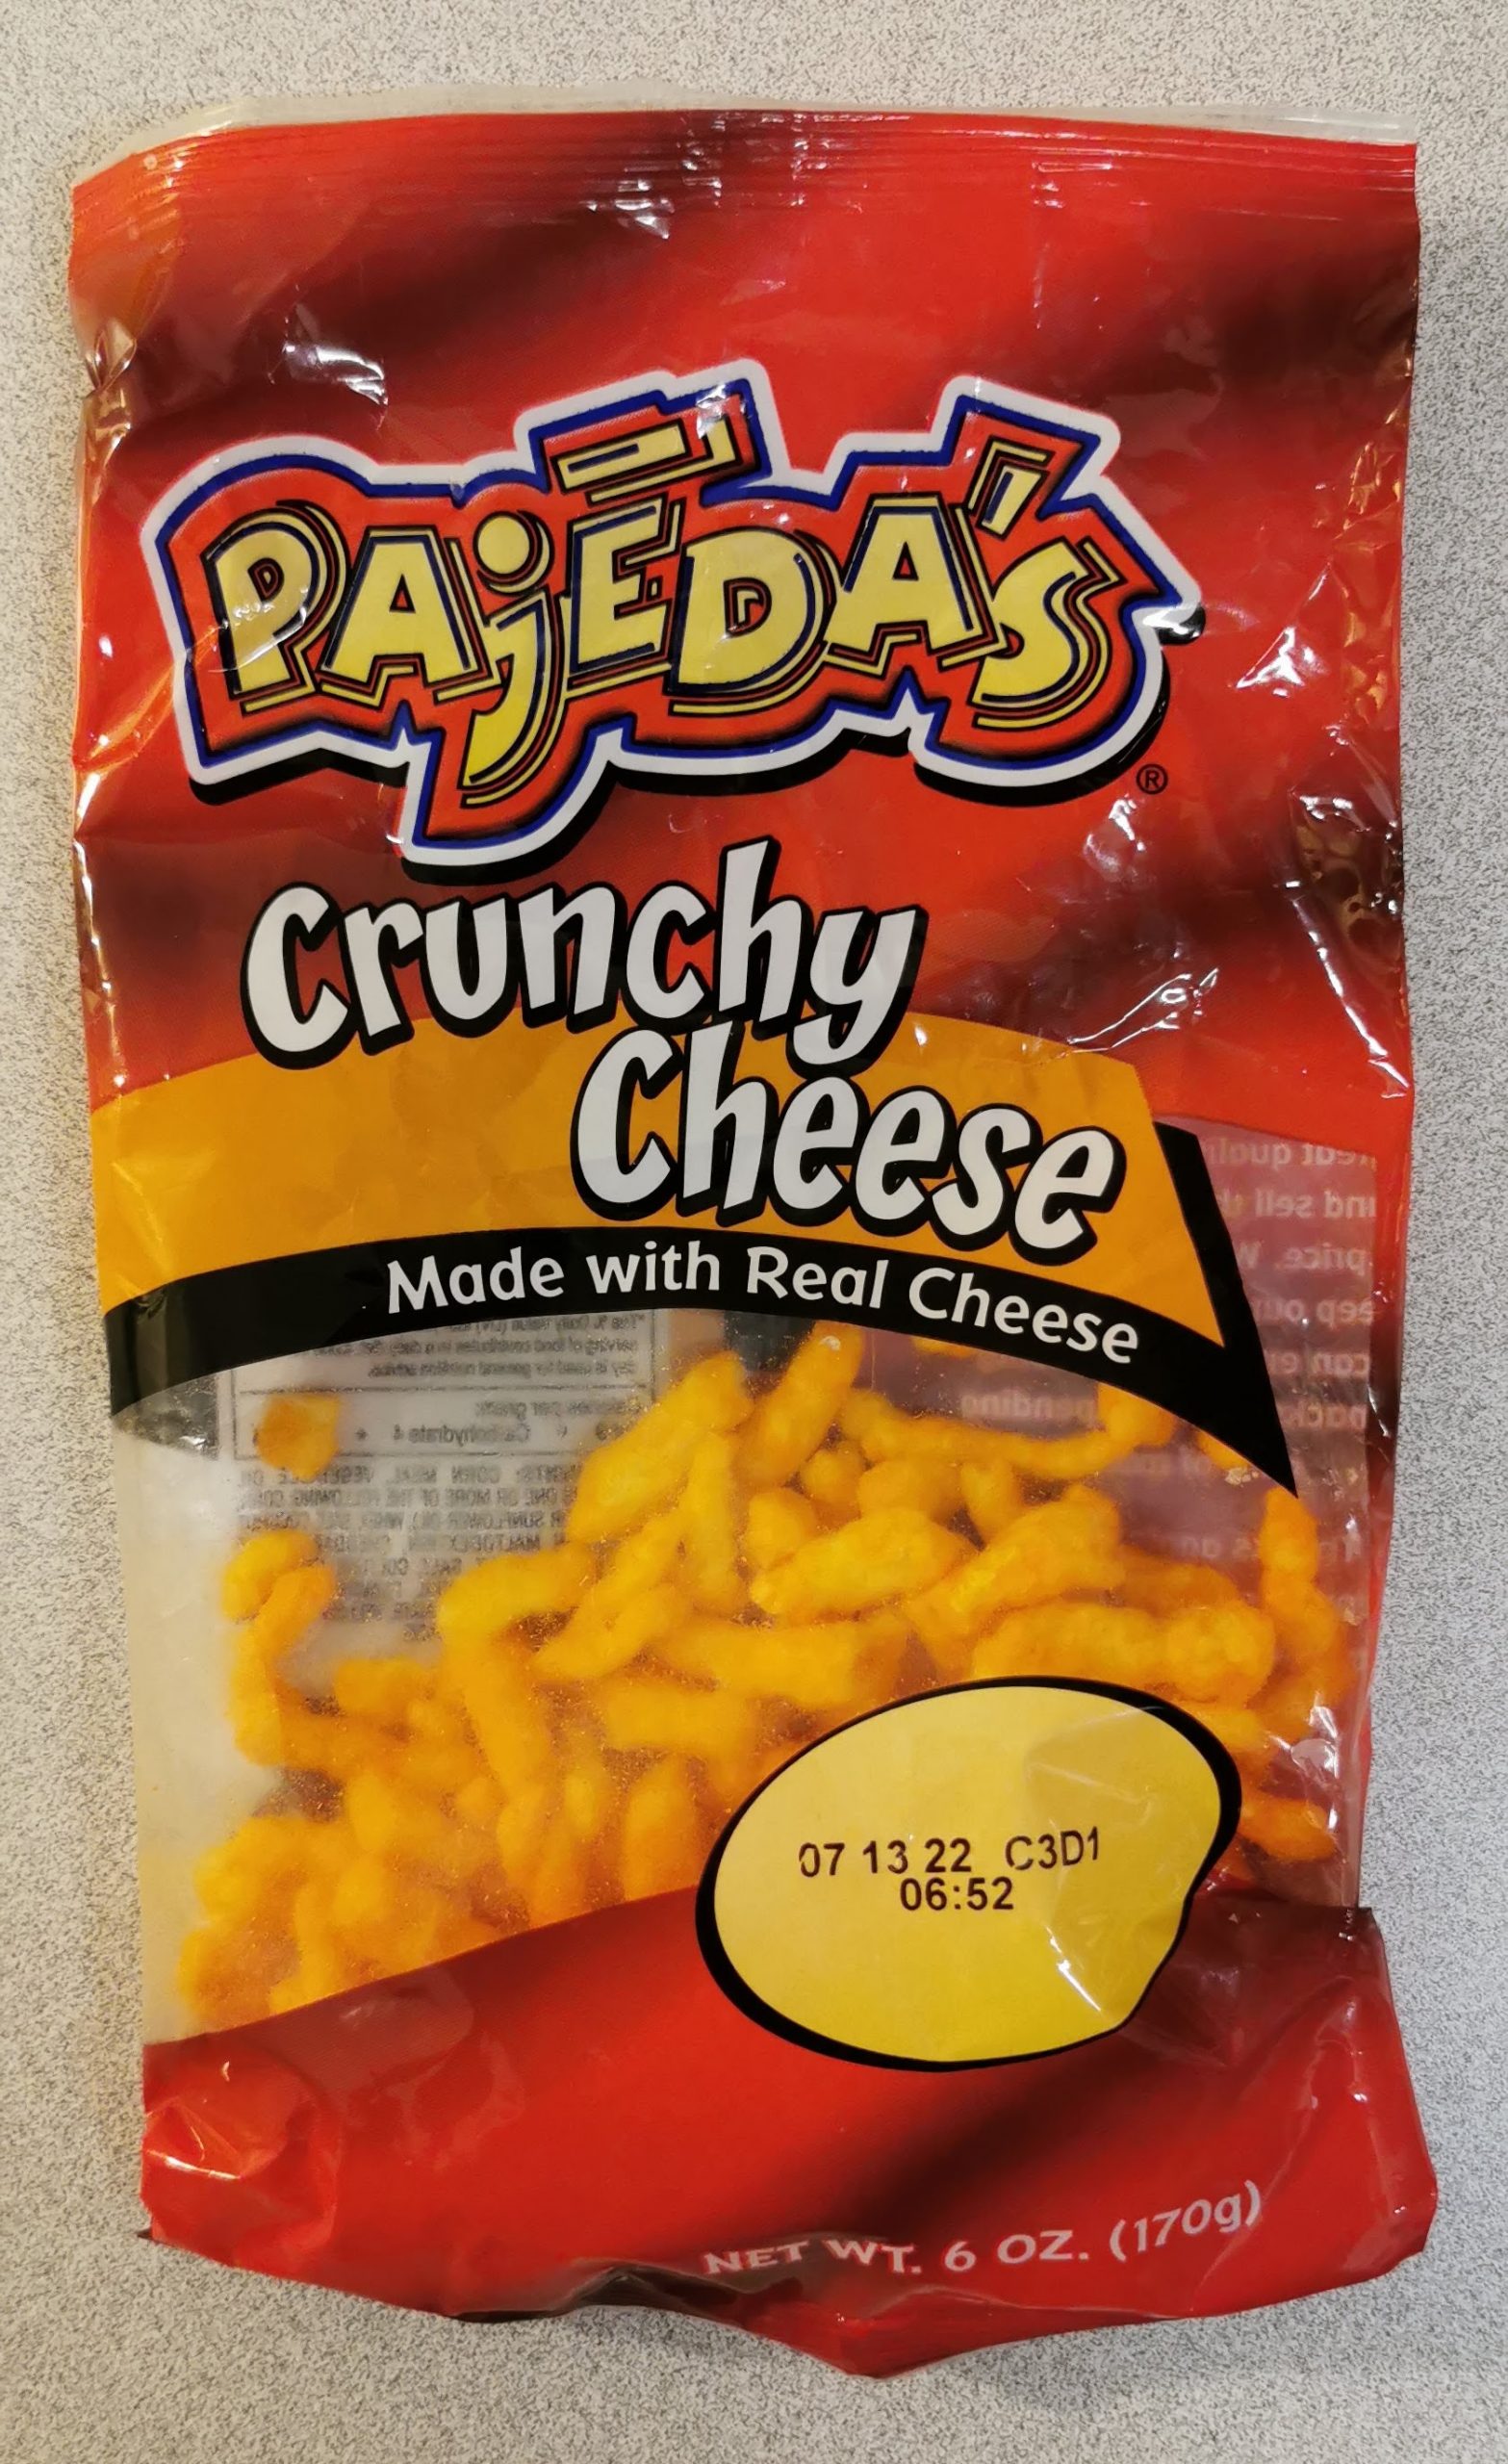 A bag of Pajeda's Crunchy Cheese (Curls), from Aldi